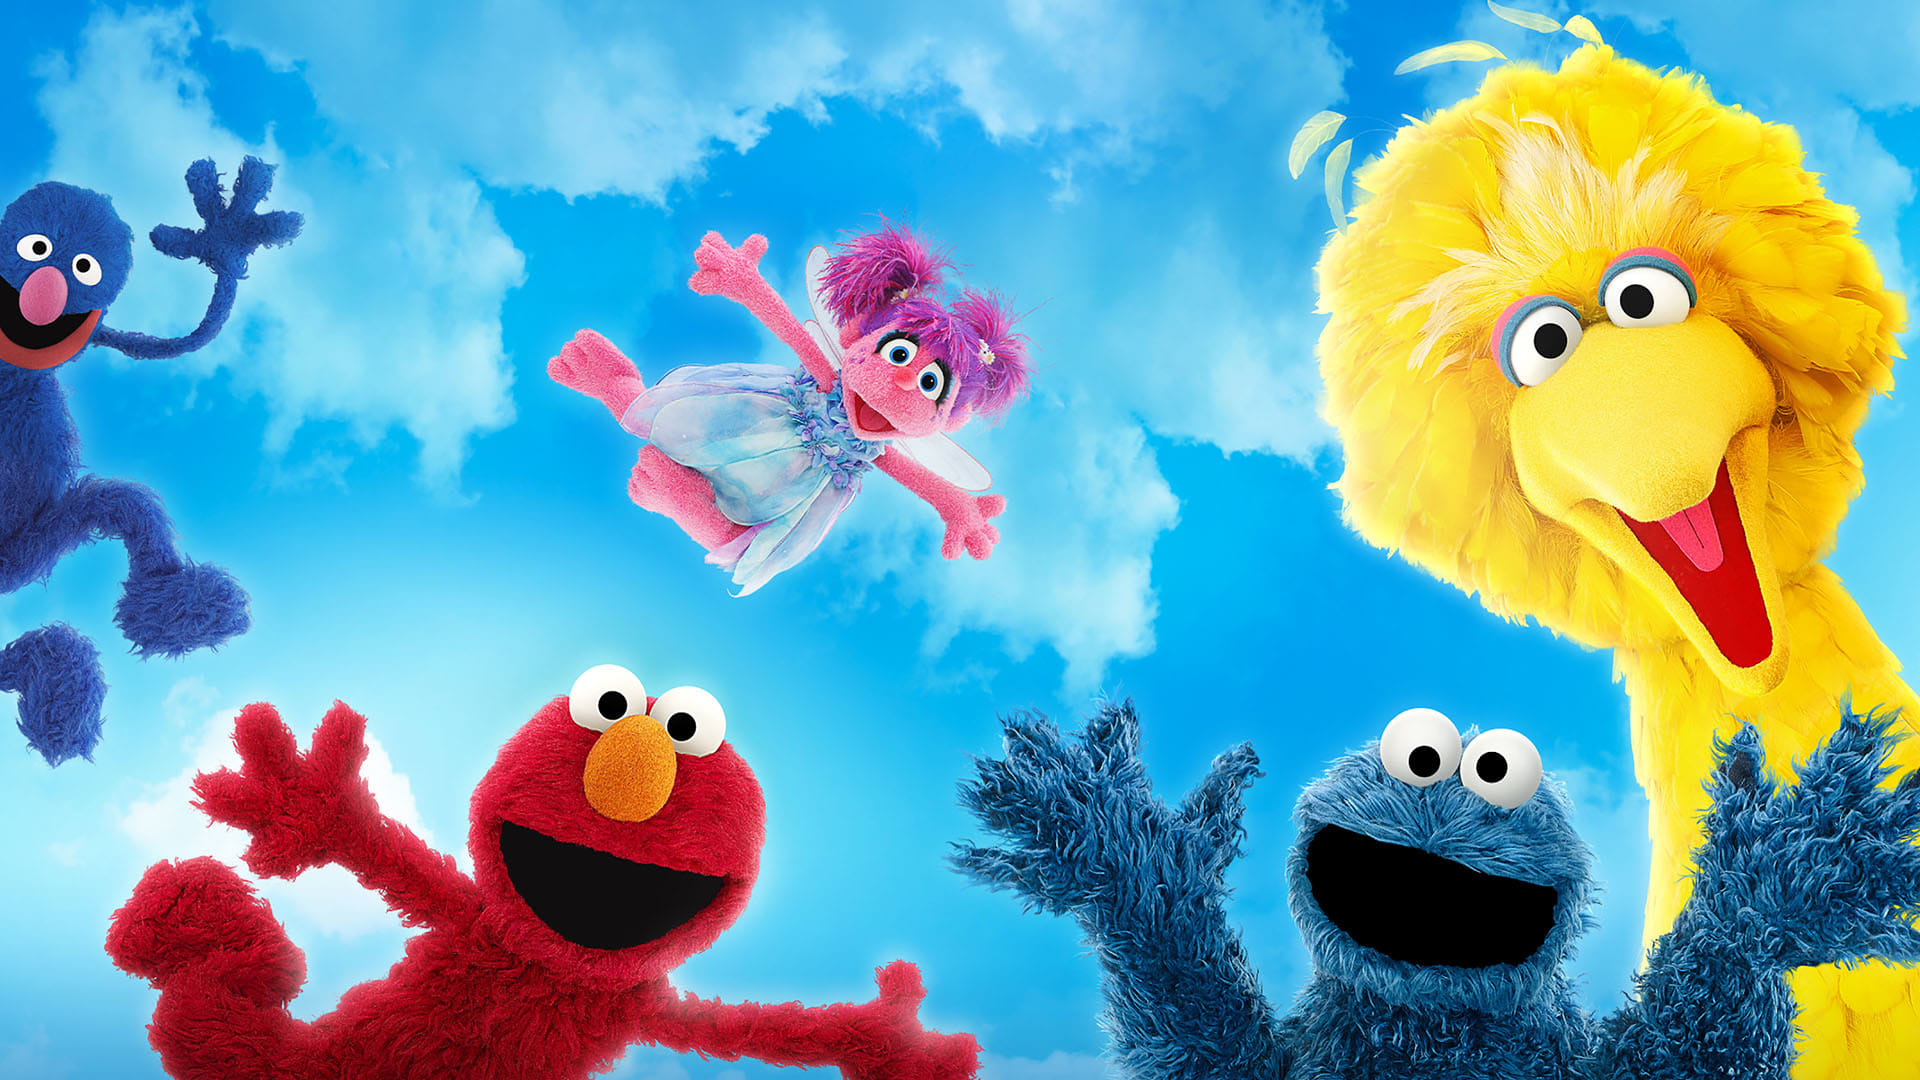 Sesame Street, HD wallpapers, Colorful backgrounds, Lively scenes, 1920x1080 Full HD Desktop